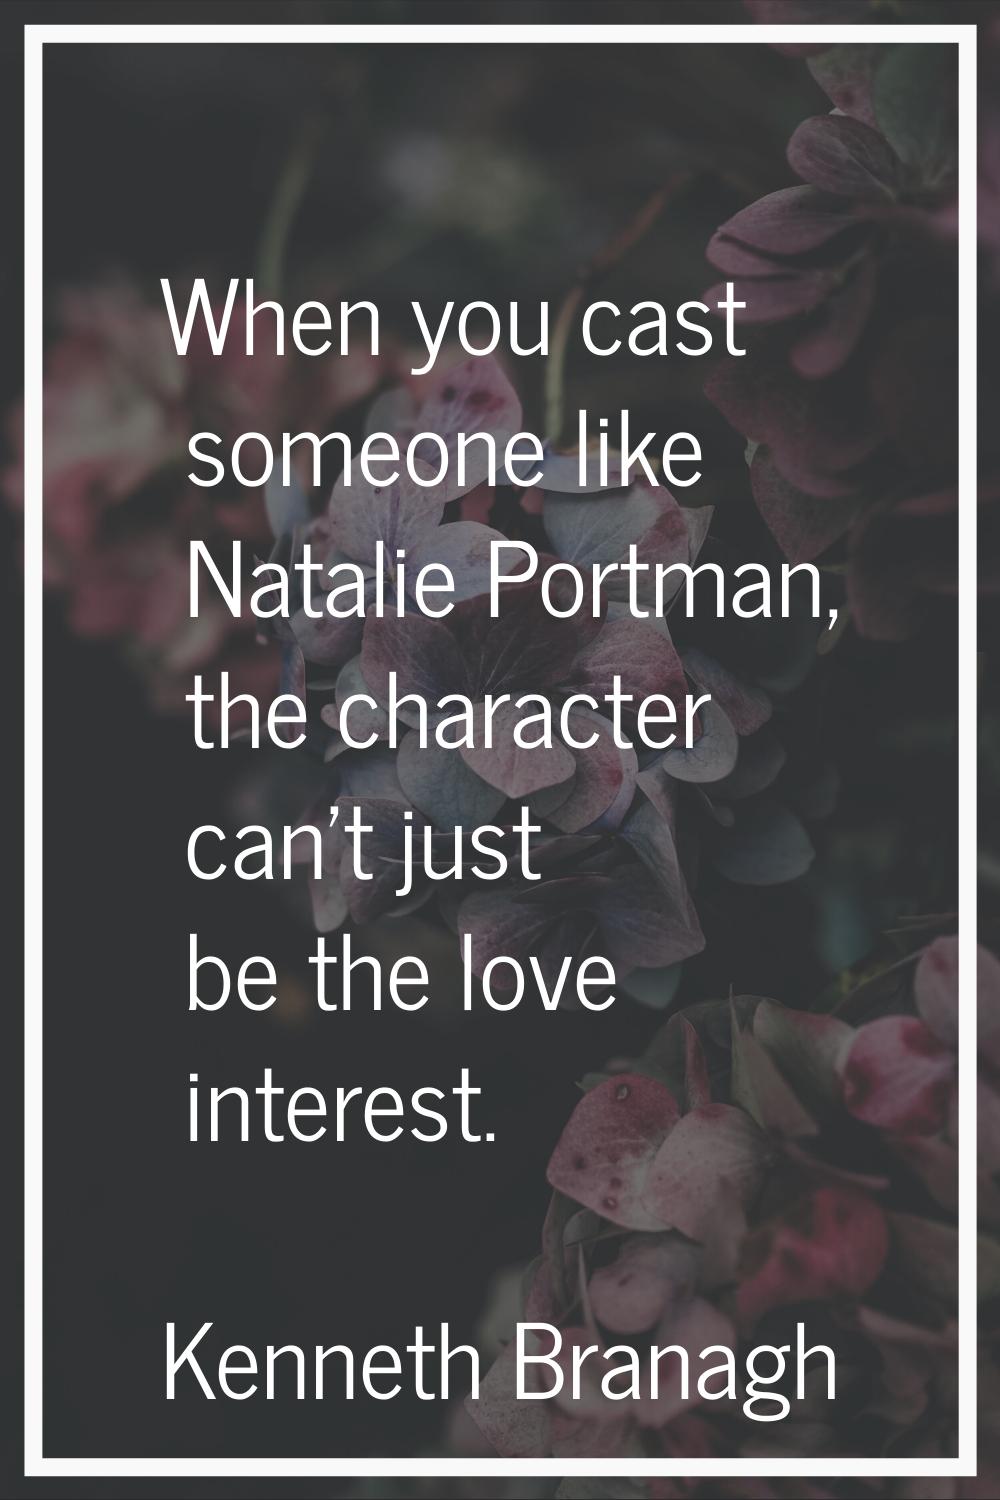 When you cast someone like Natalie Portman, the character can't just be the love interest.